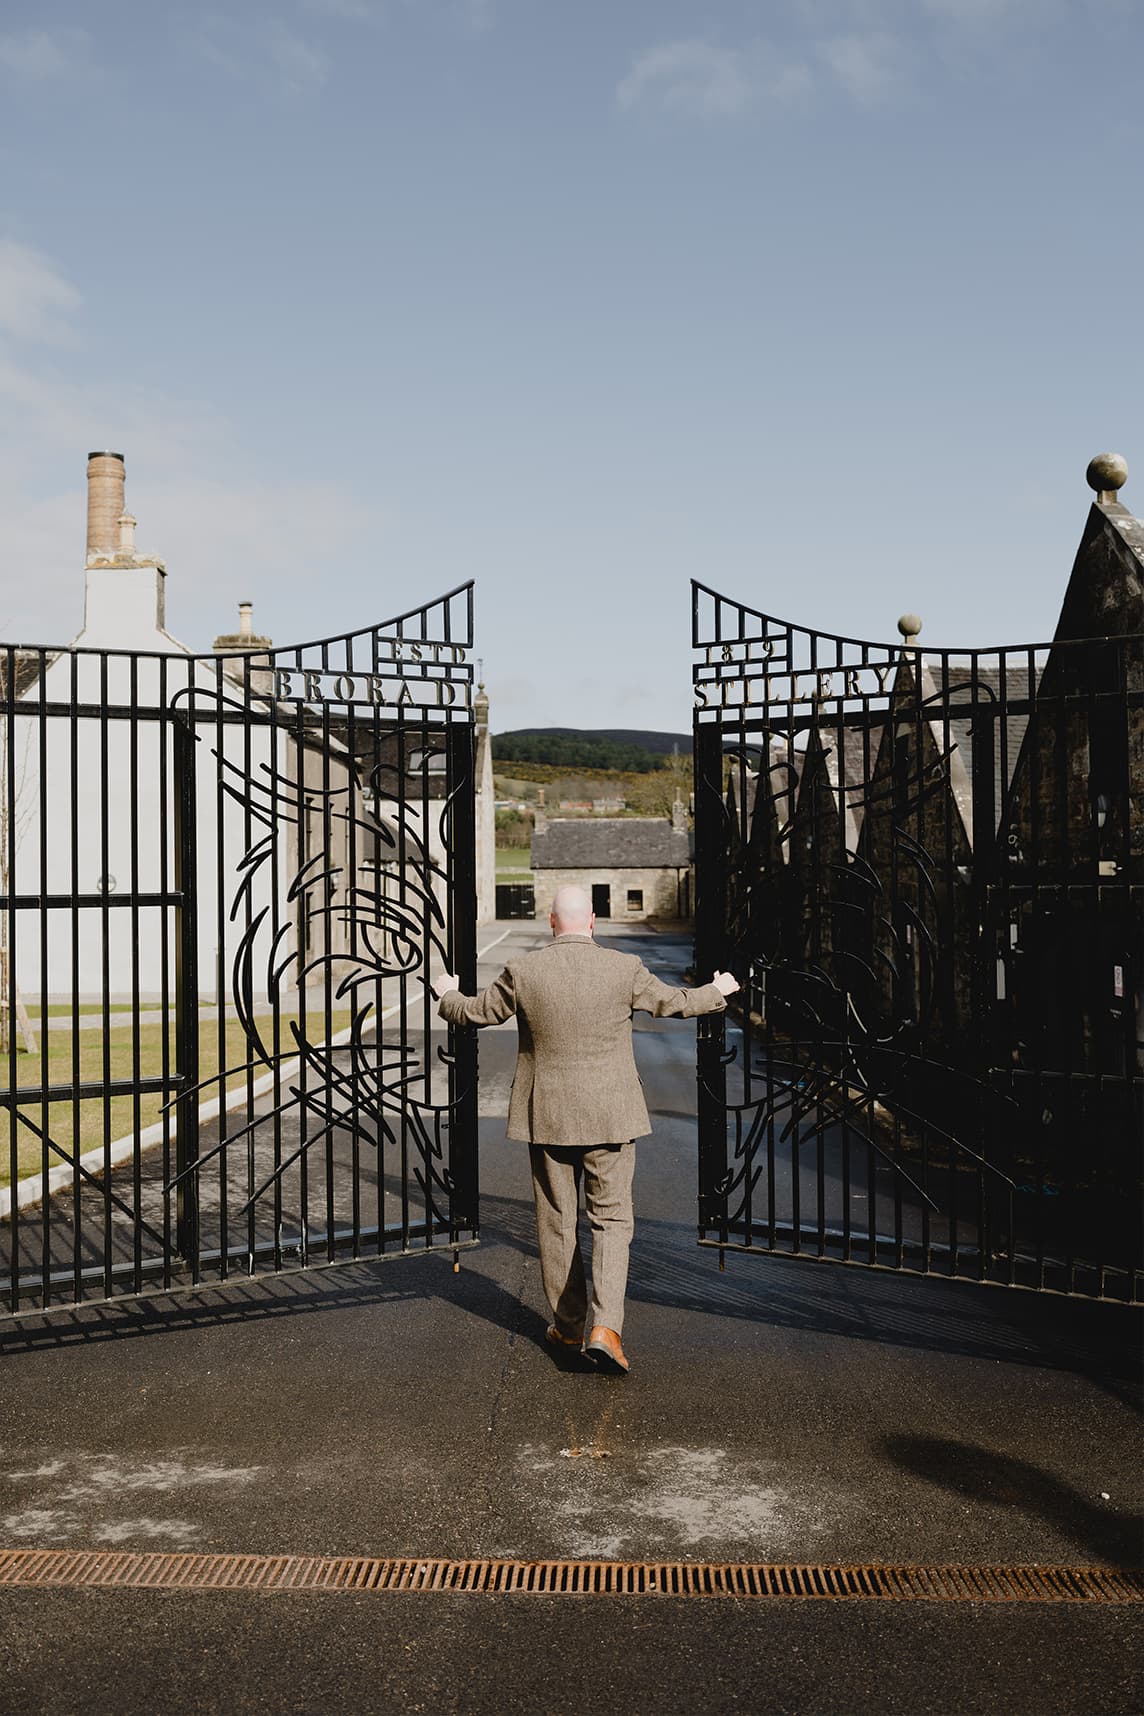 The Brora Distillery entrance in Scotland featuring the branded gates